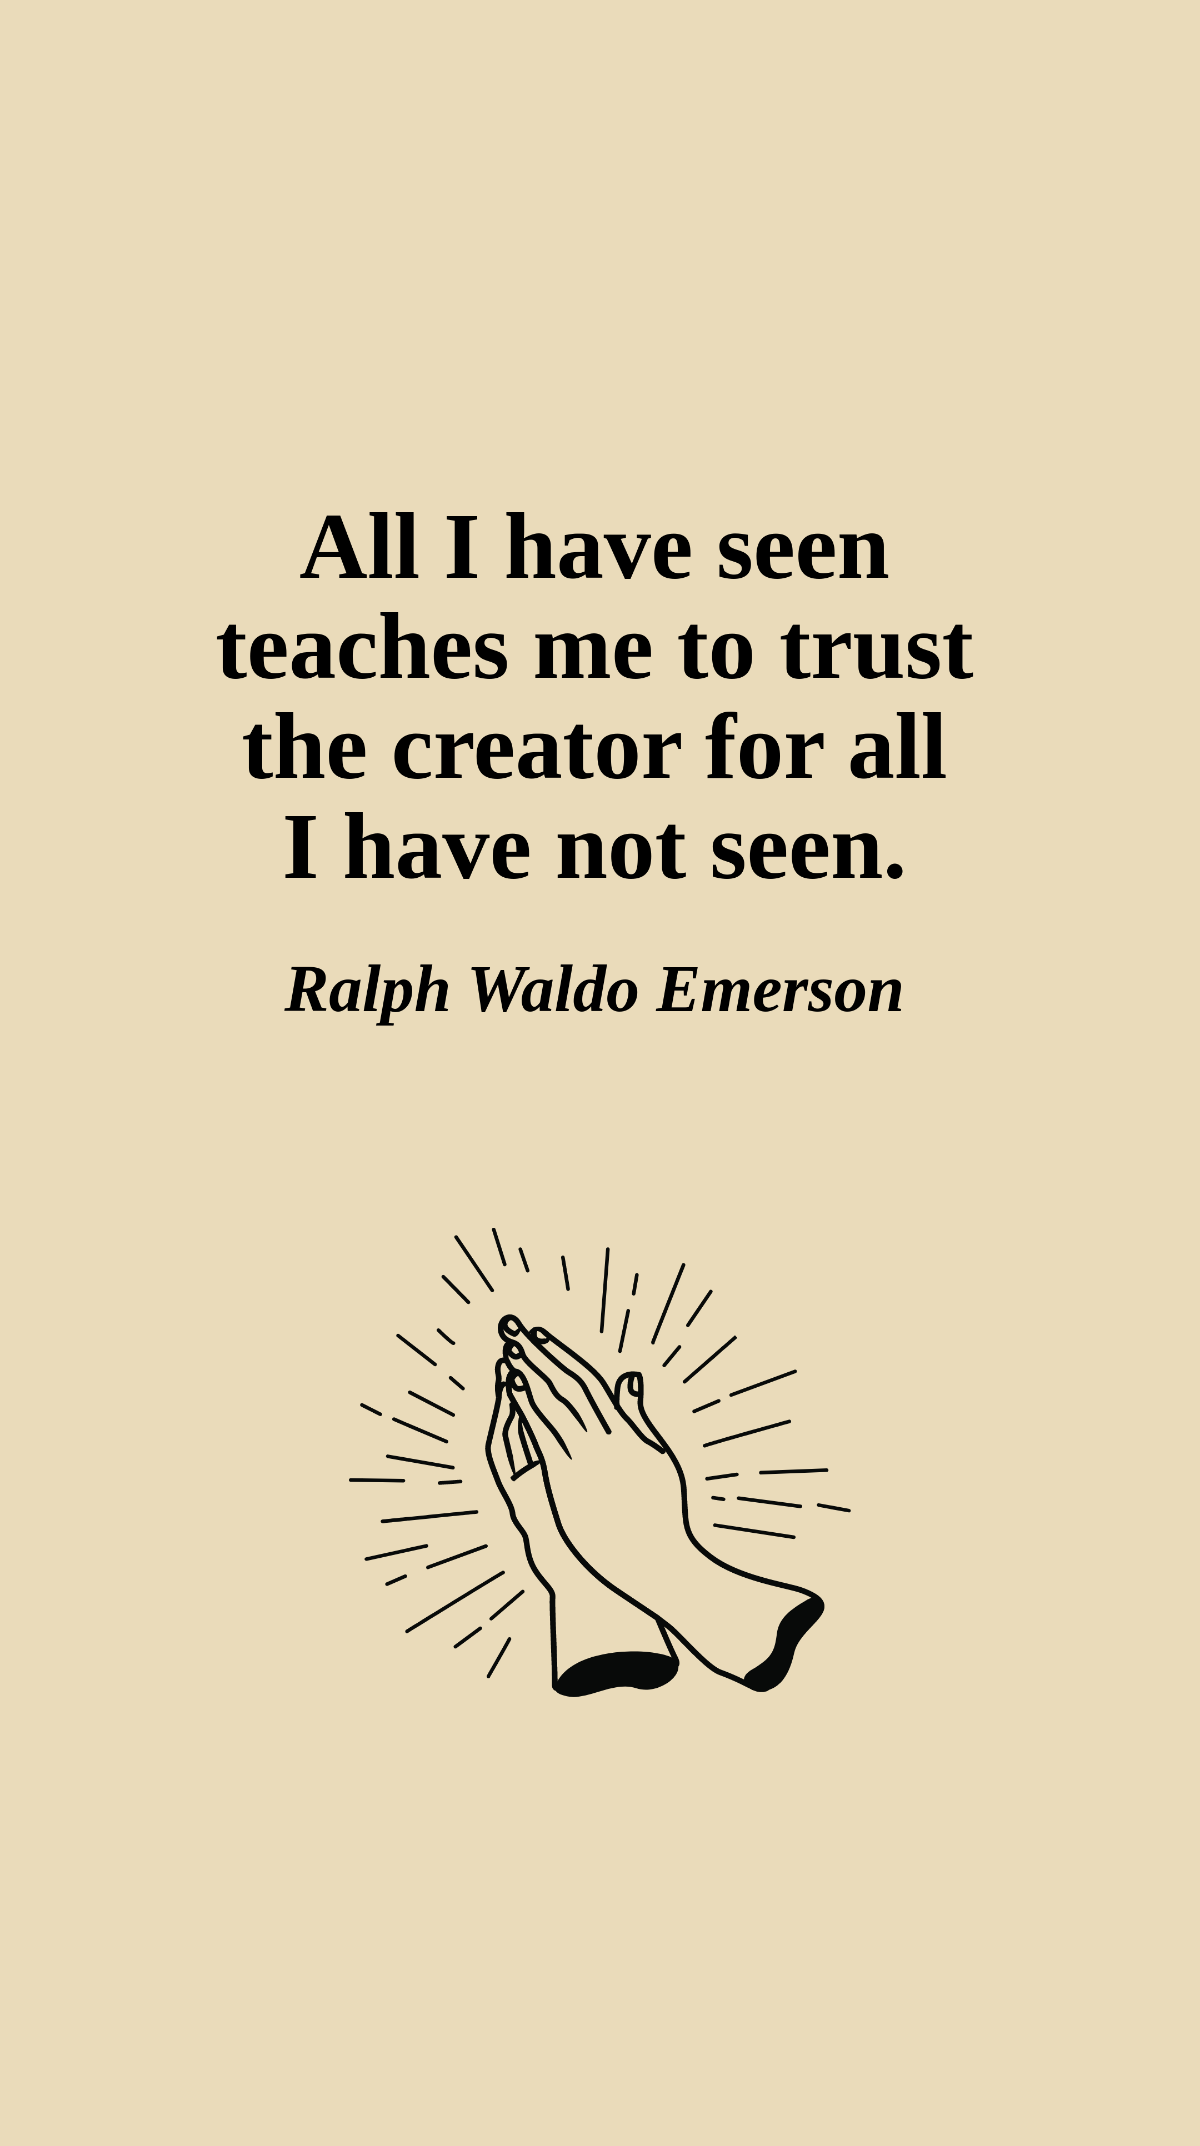 Ralph Waldo Emerson - All I have seen teaches me to trust the creator for all I have not seen.